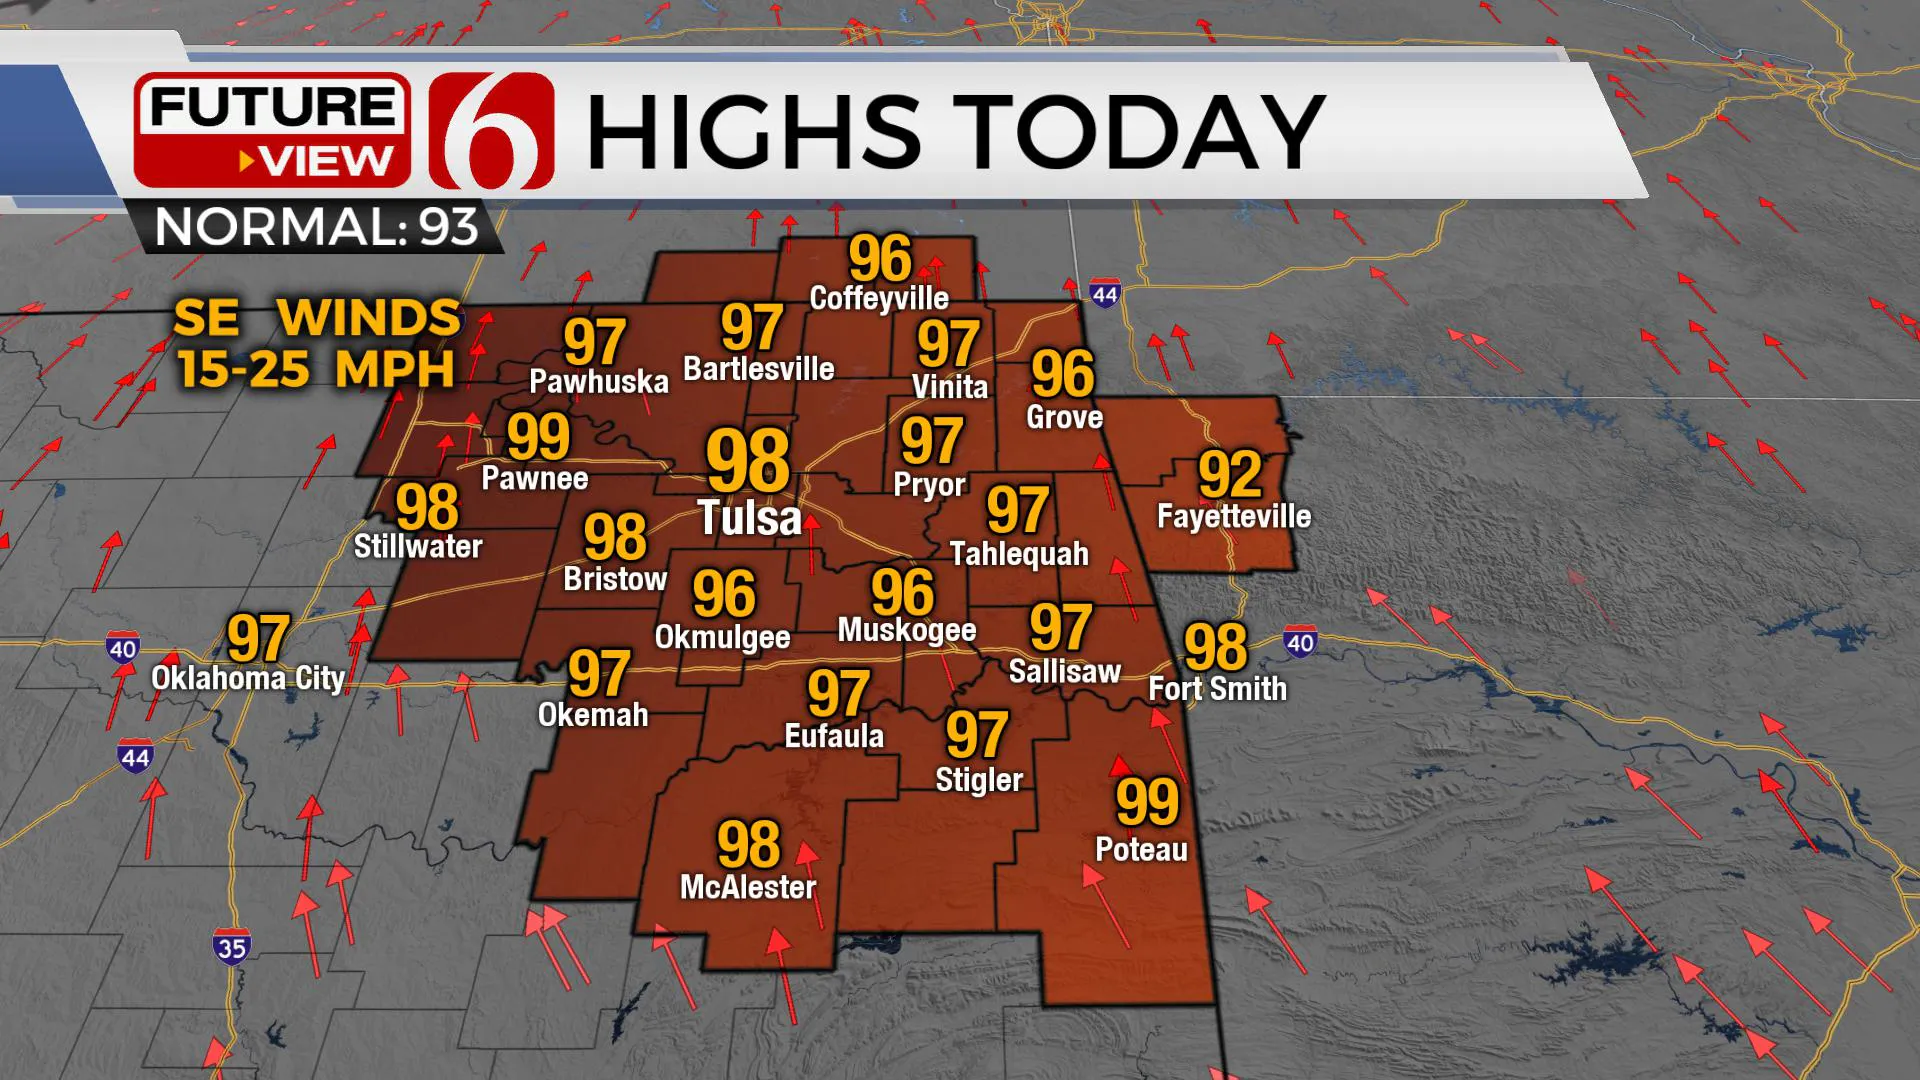 Highs for today